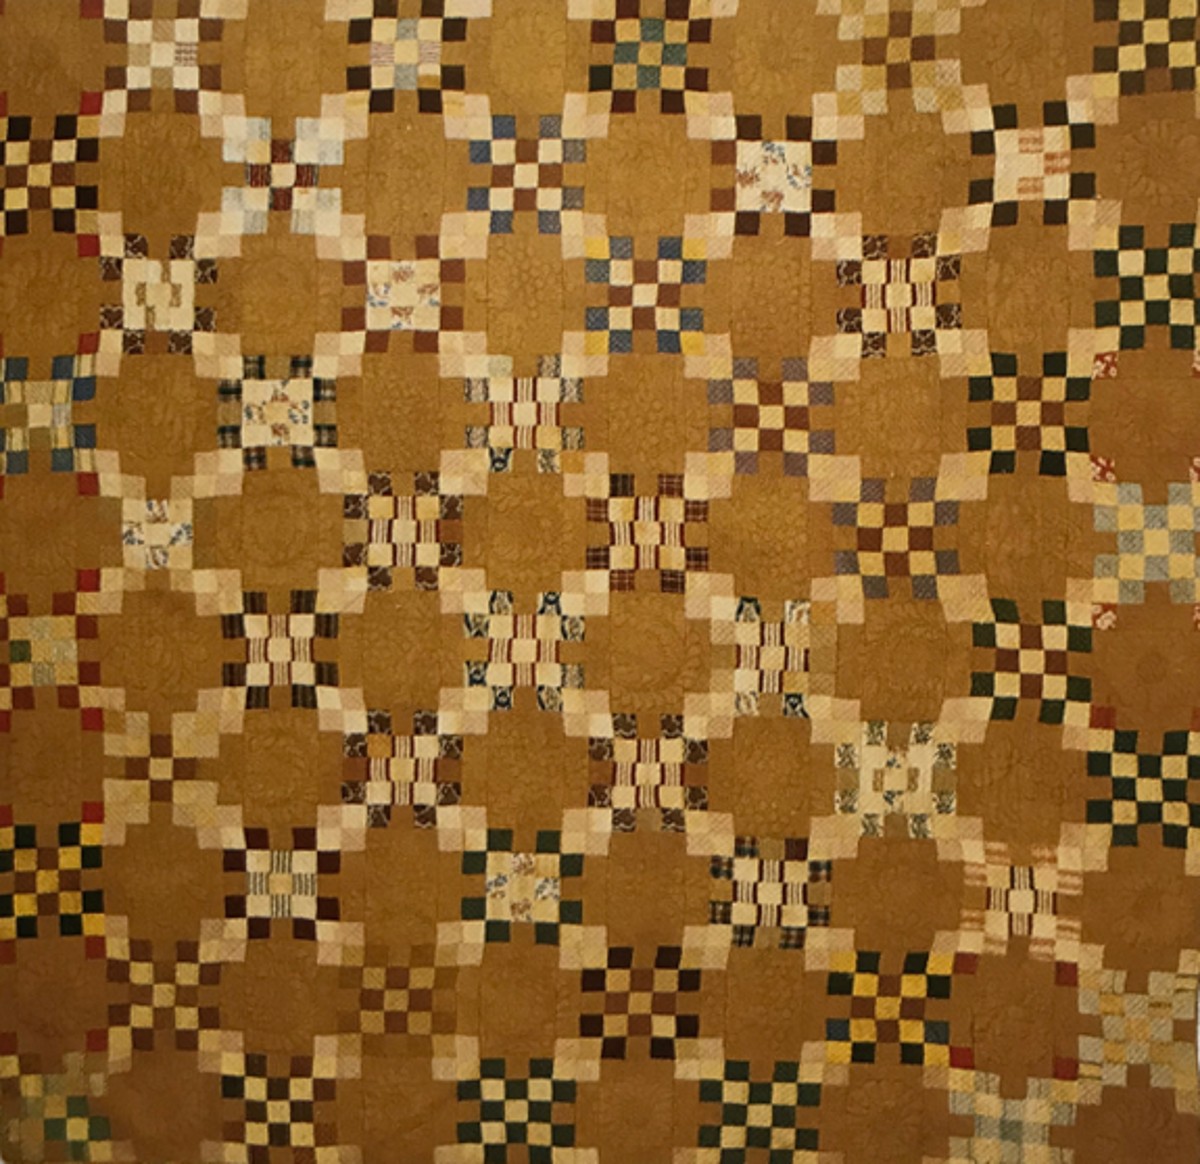 The Dutton Nine Patch quilt from the Waterford Foundation